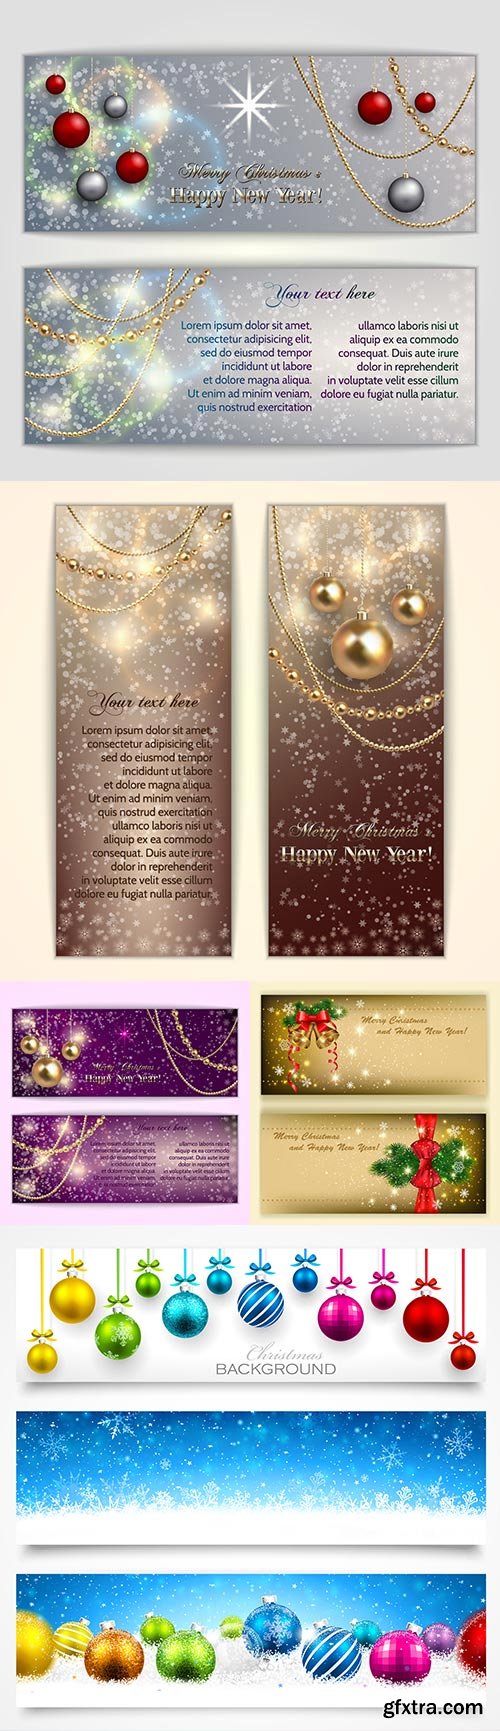 New Year Banners